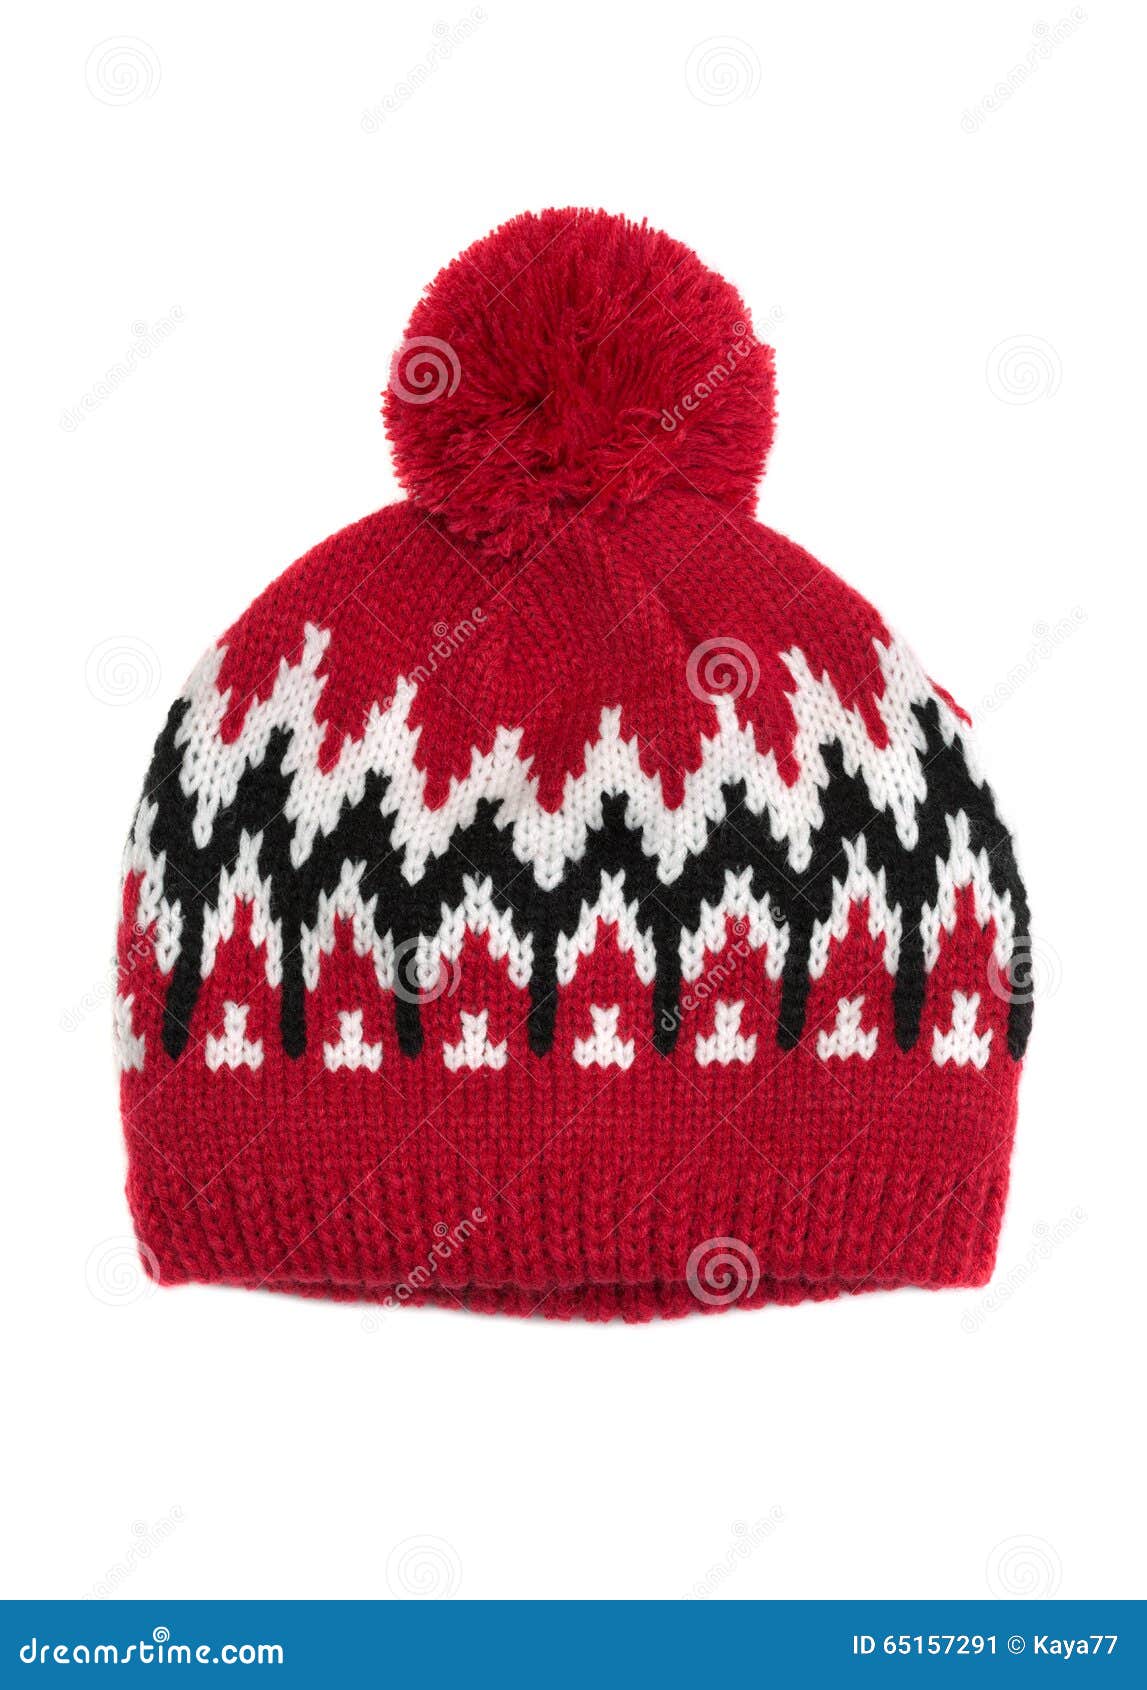 Knitted hat with pompon stock image. Image of head, freeze - 65157291